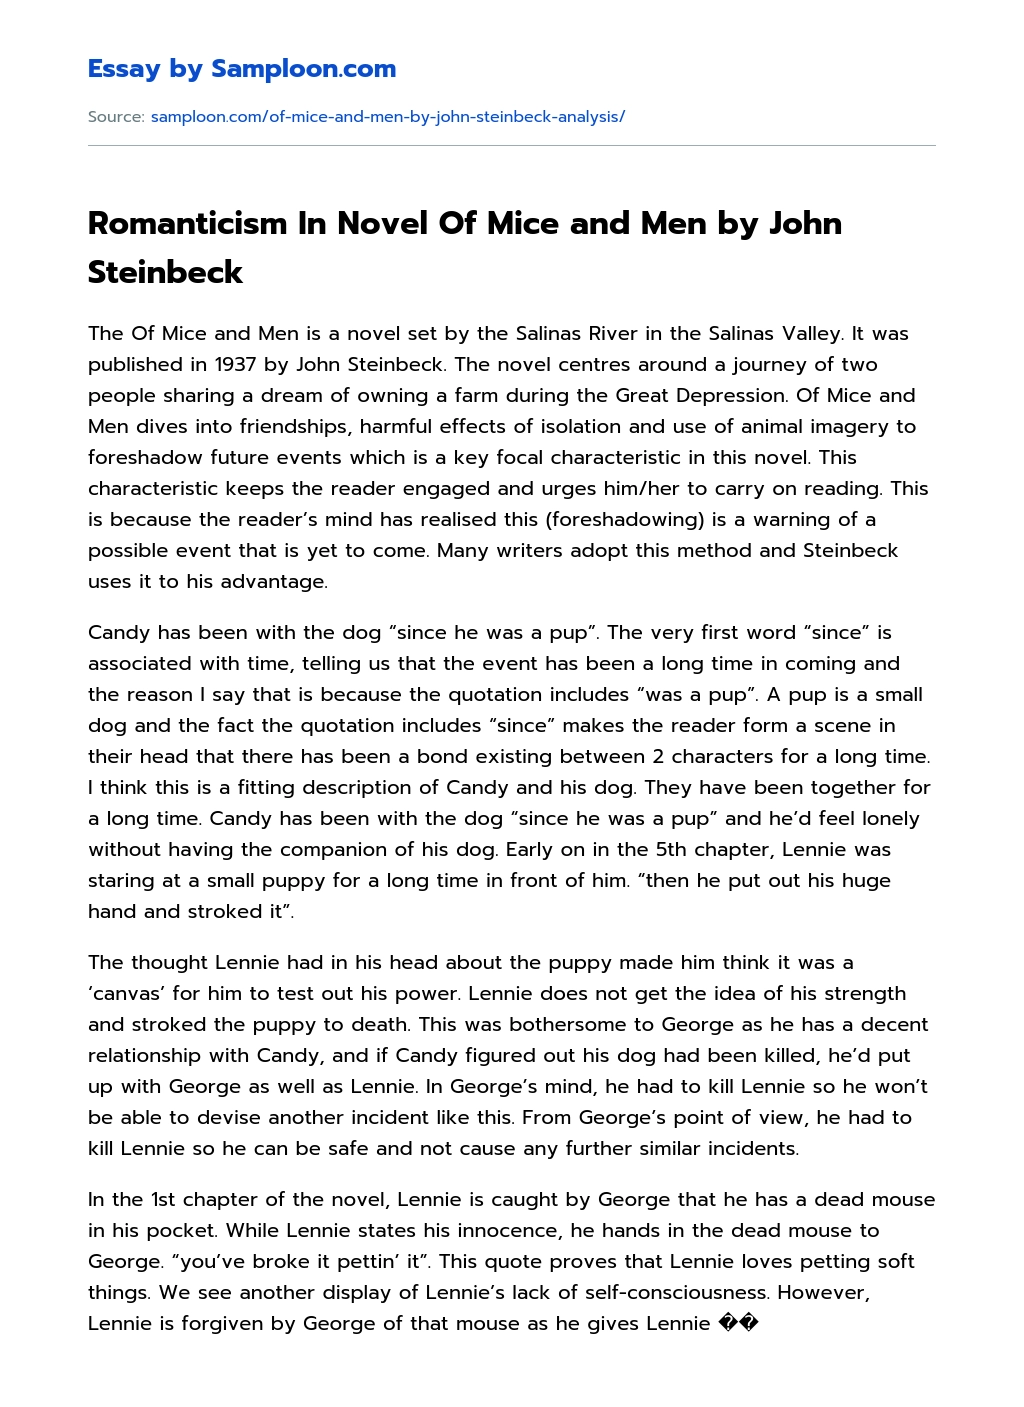 Romanticism In Novel Of Mice and Men by John Steinbeck essay